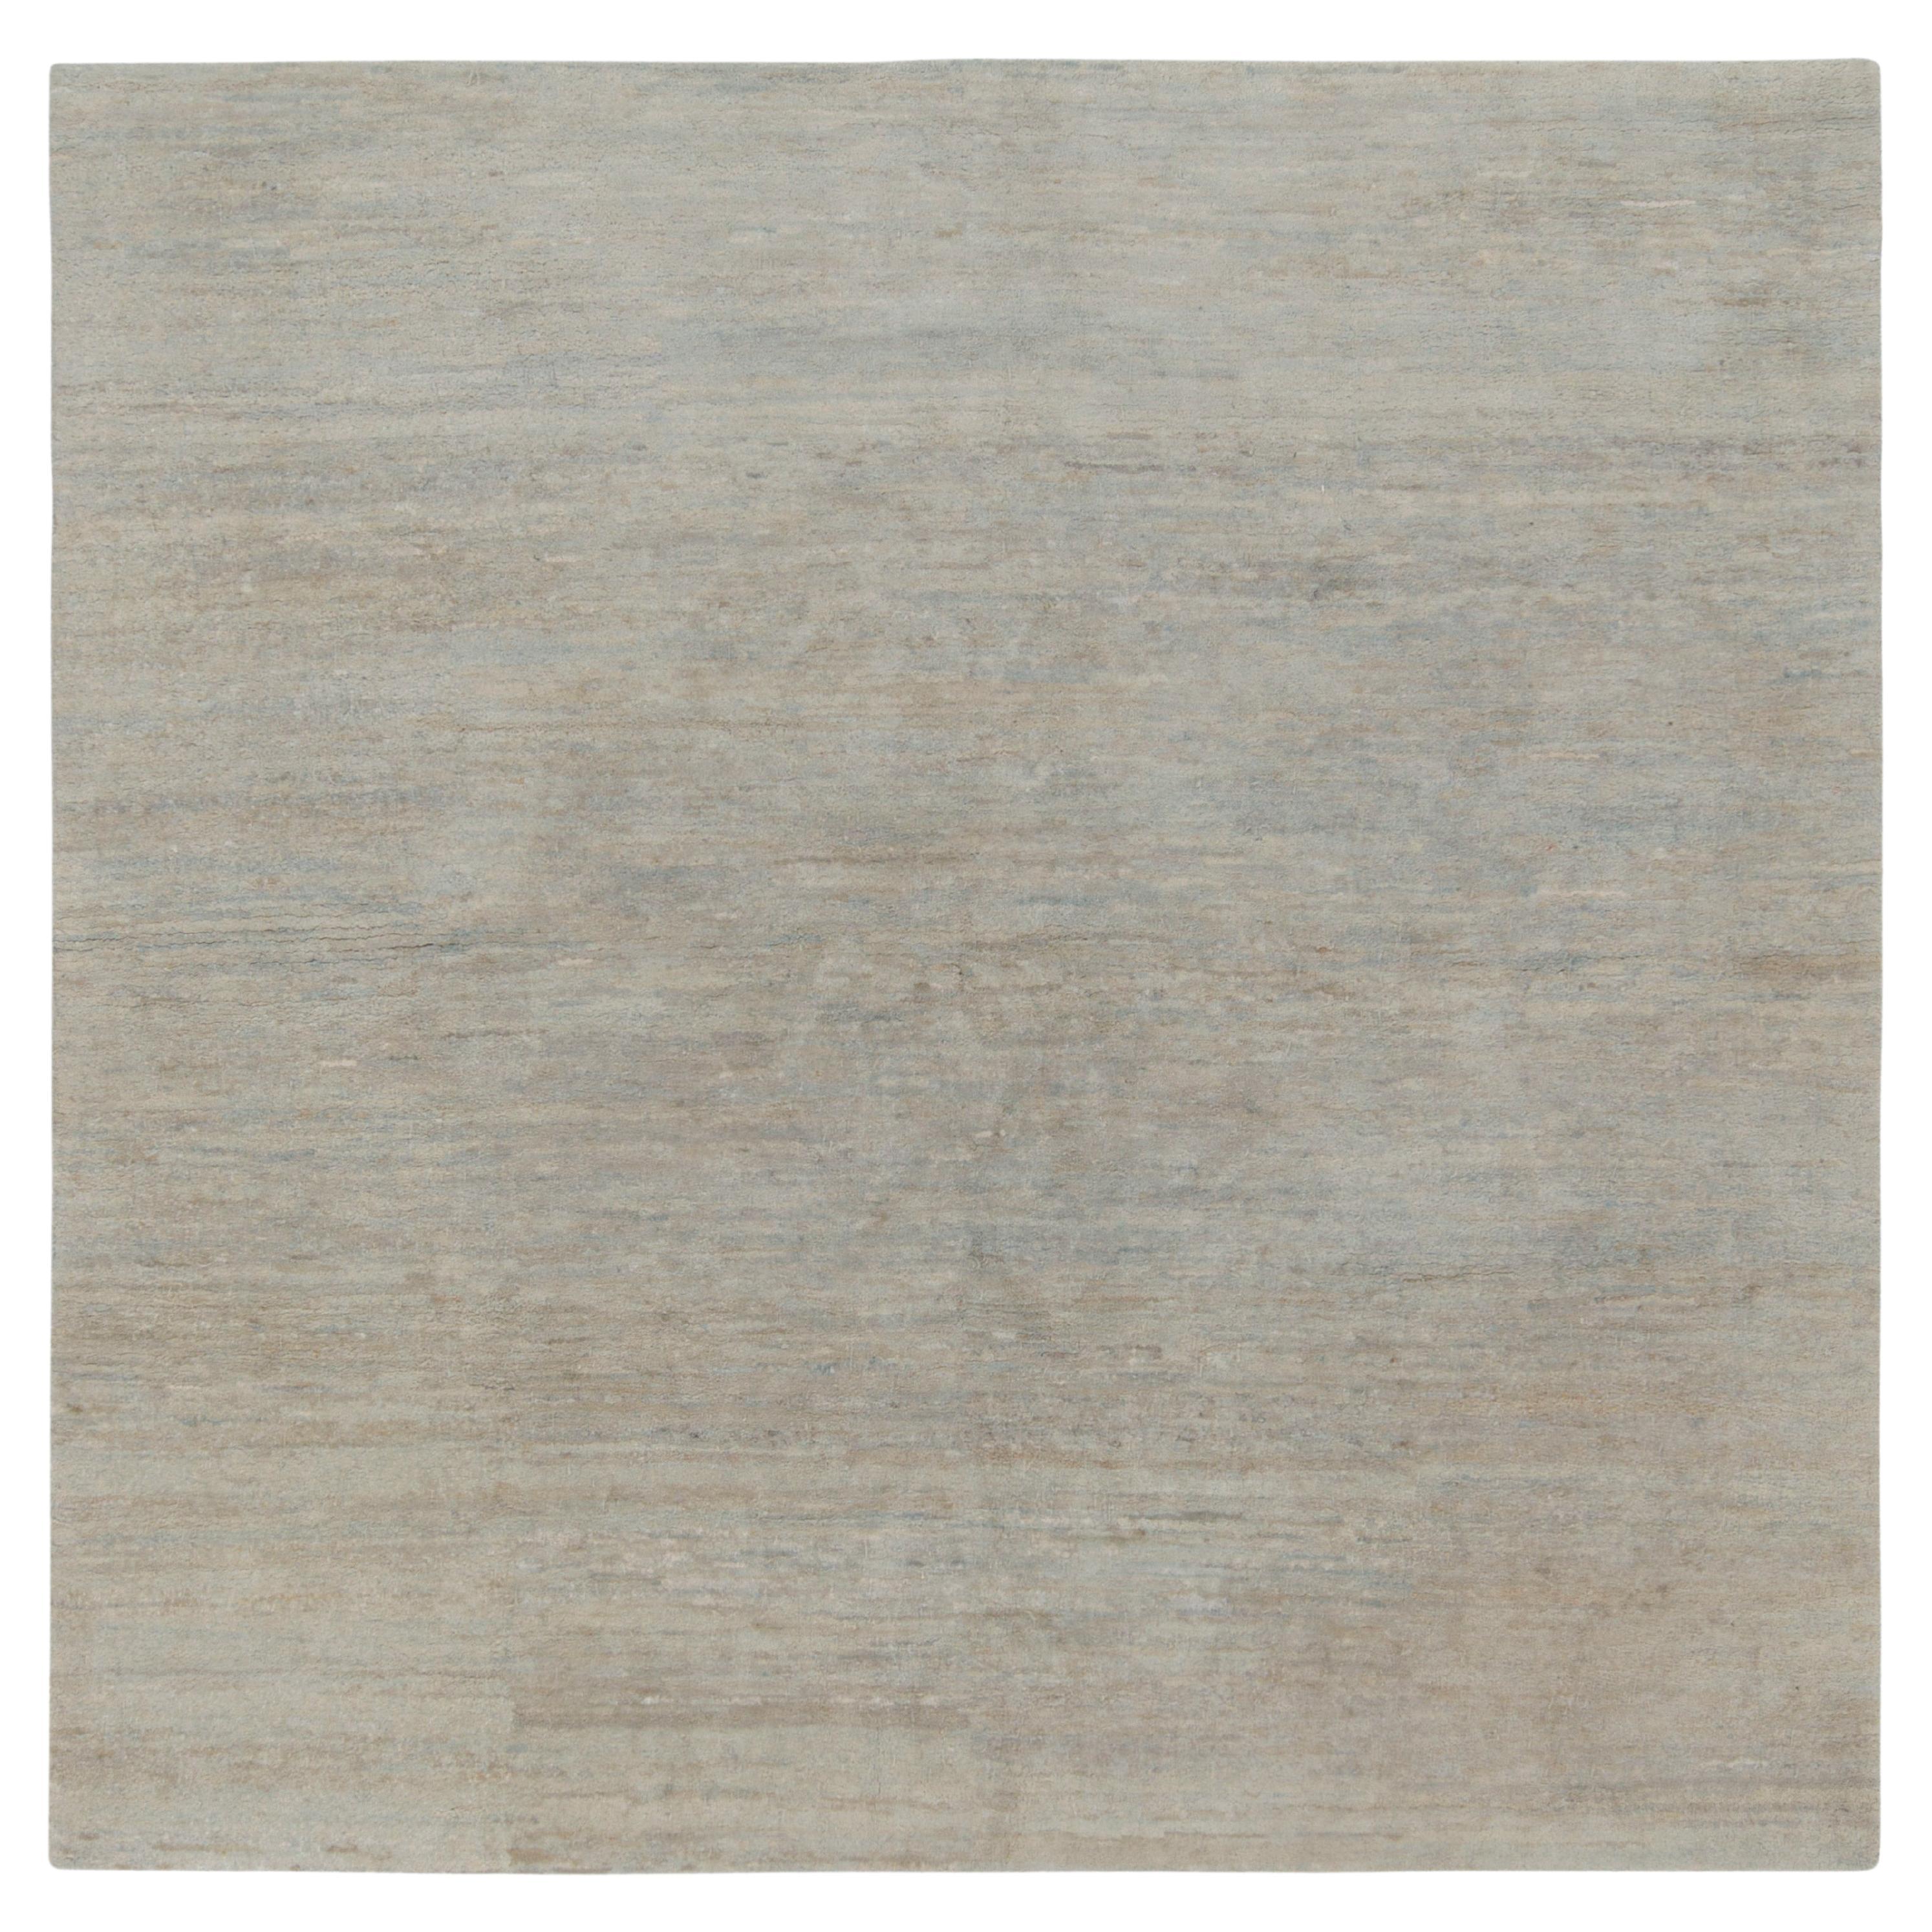 Rug & Kilim introduces its refined take on modern aesthetics with this smart, solid gray rug in a square rendering from our Texture of Color collection. The contemporary piece relishes a mature colorway of silver-gray, light blue & beige-brown